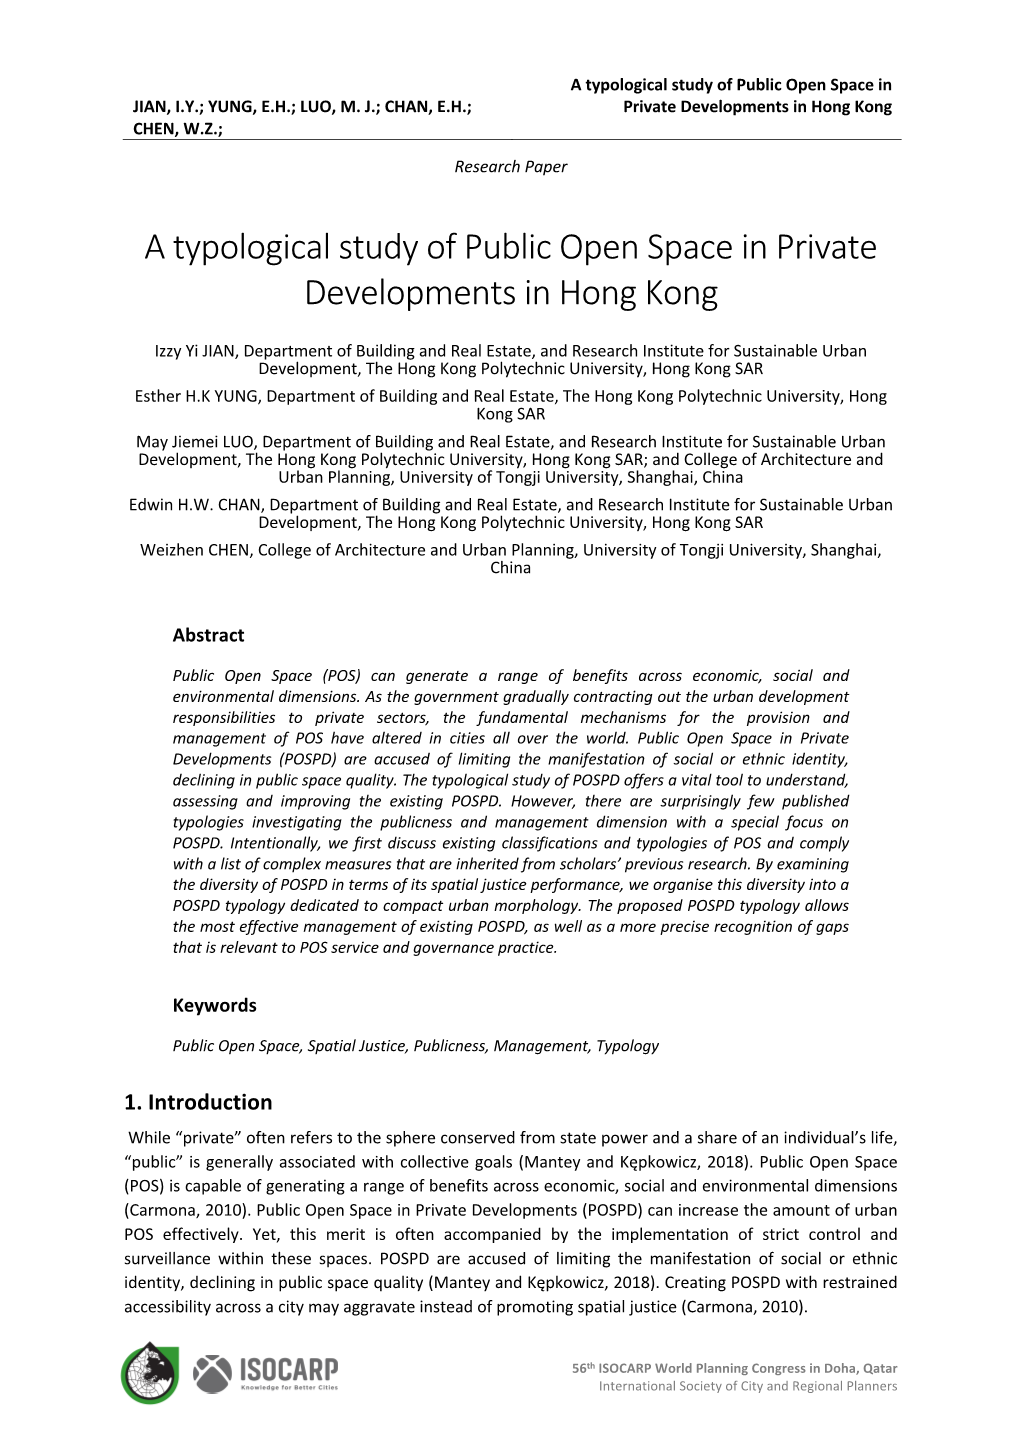 A Typological Study of Public Open Space in Private Developments in Hong Kong